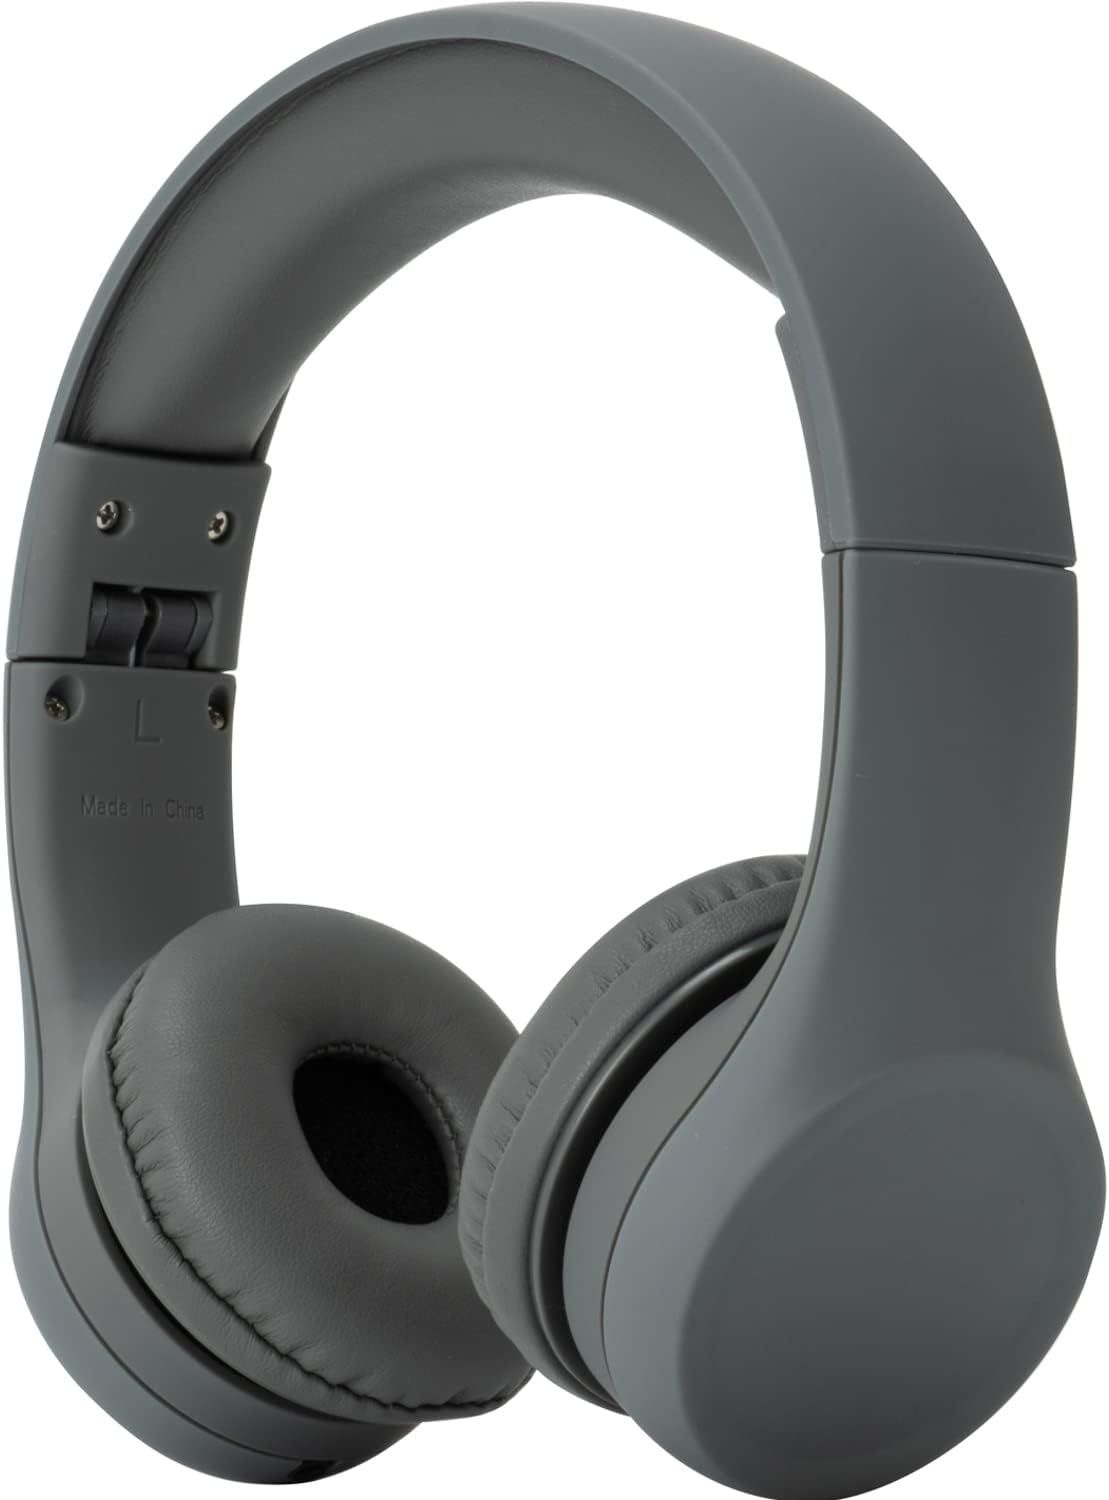 Snug Play+ Kids Headphones with Volume Limiting for Toddlers (Boys/Girls) - Grey | Amazon (US)